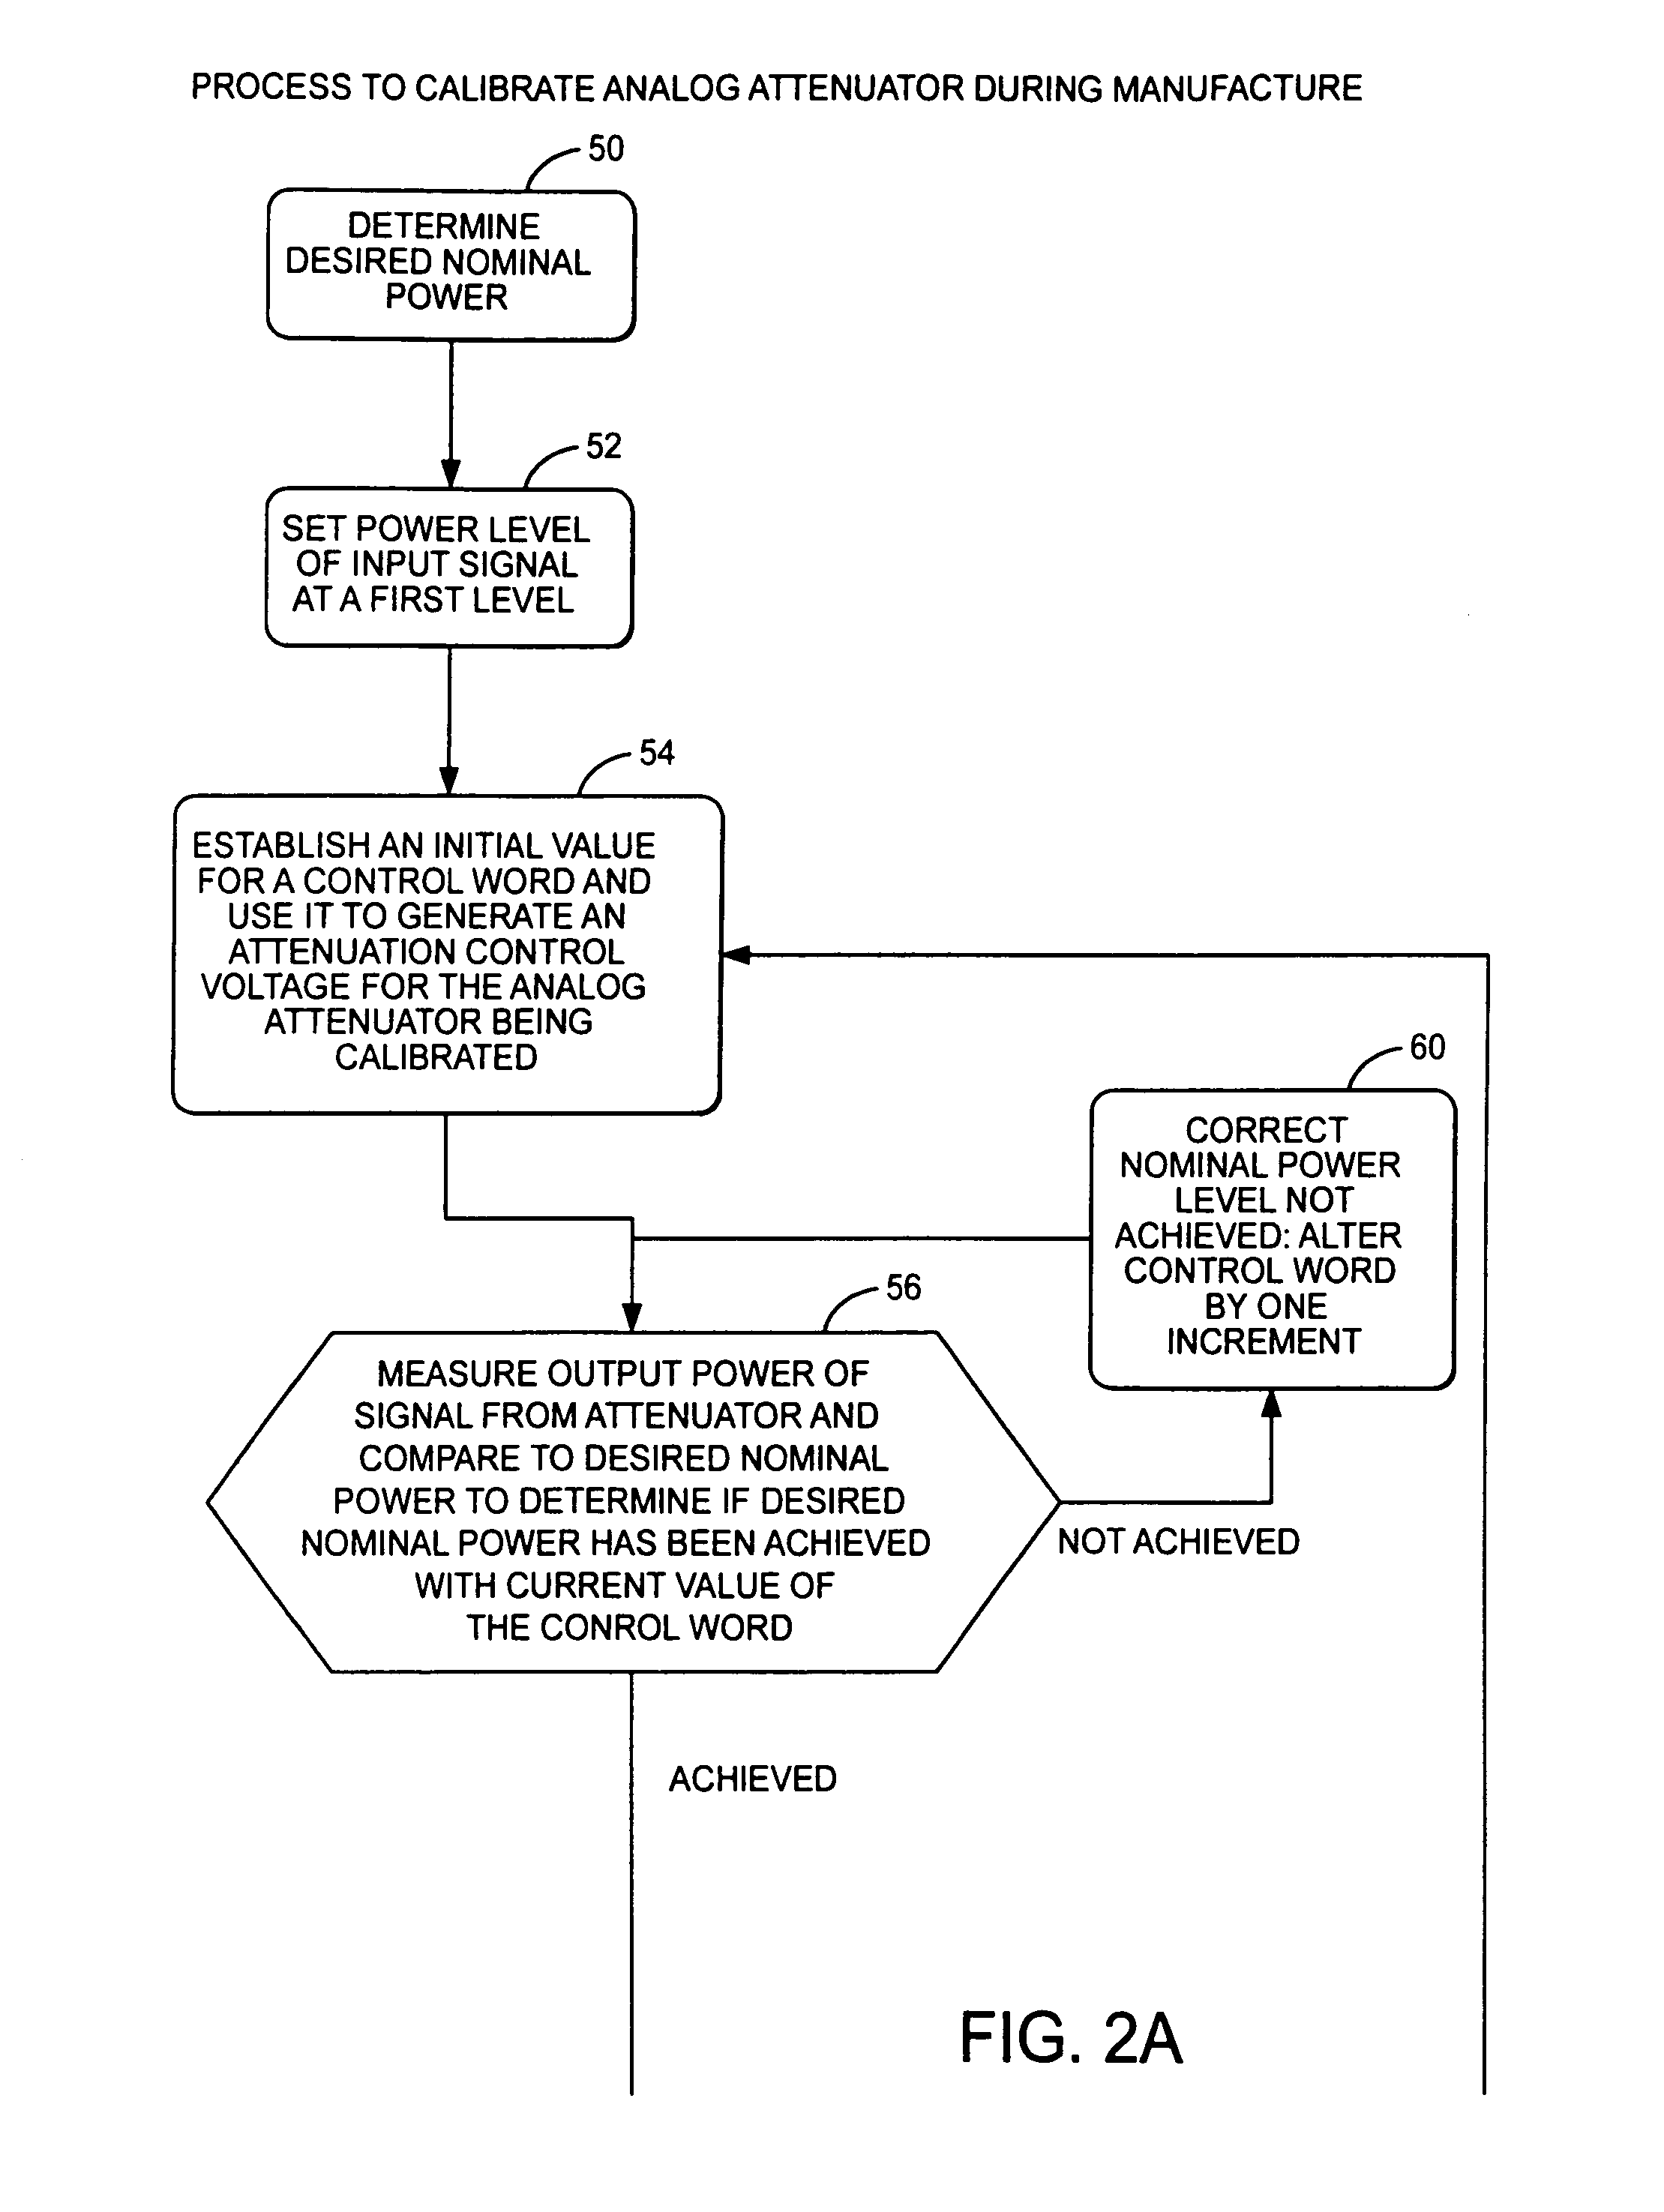 Front end automatic gain control circuit using a control word generator